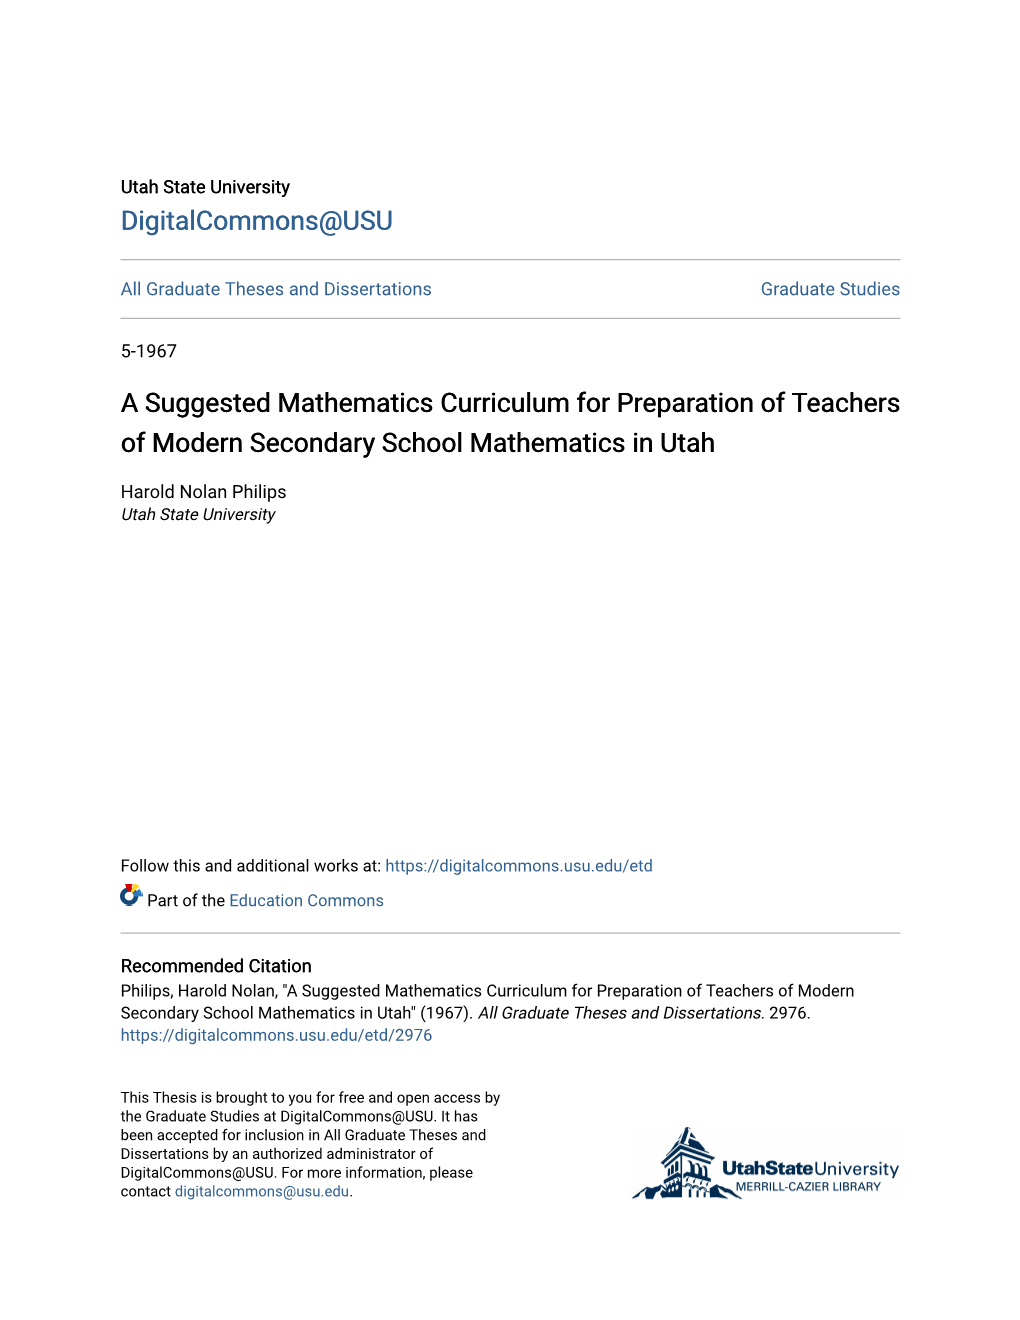 A Suggested Mathematics Curriculum for Preparation of Teachers of Modern Secondary School Mathematics in Utah